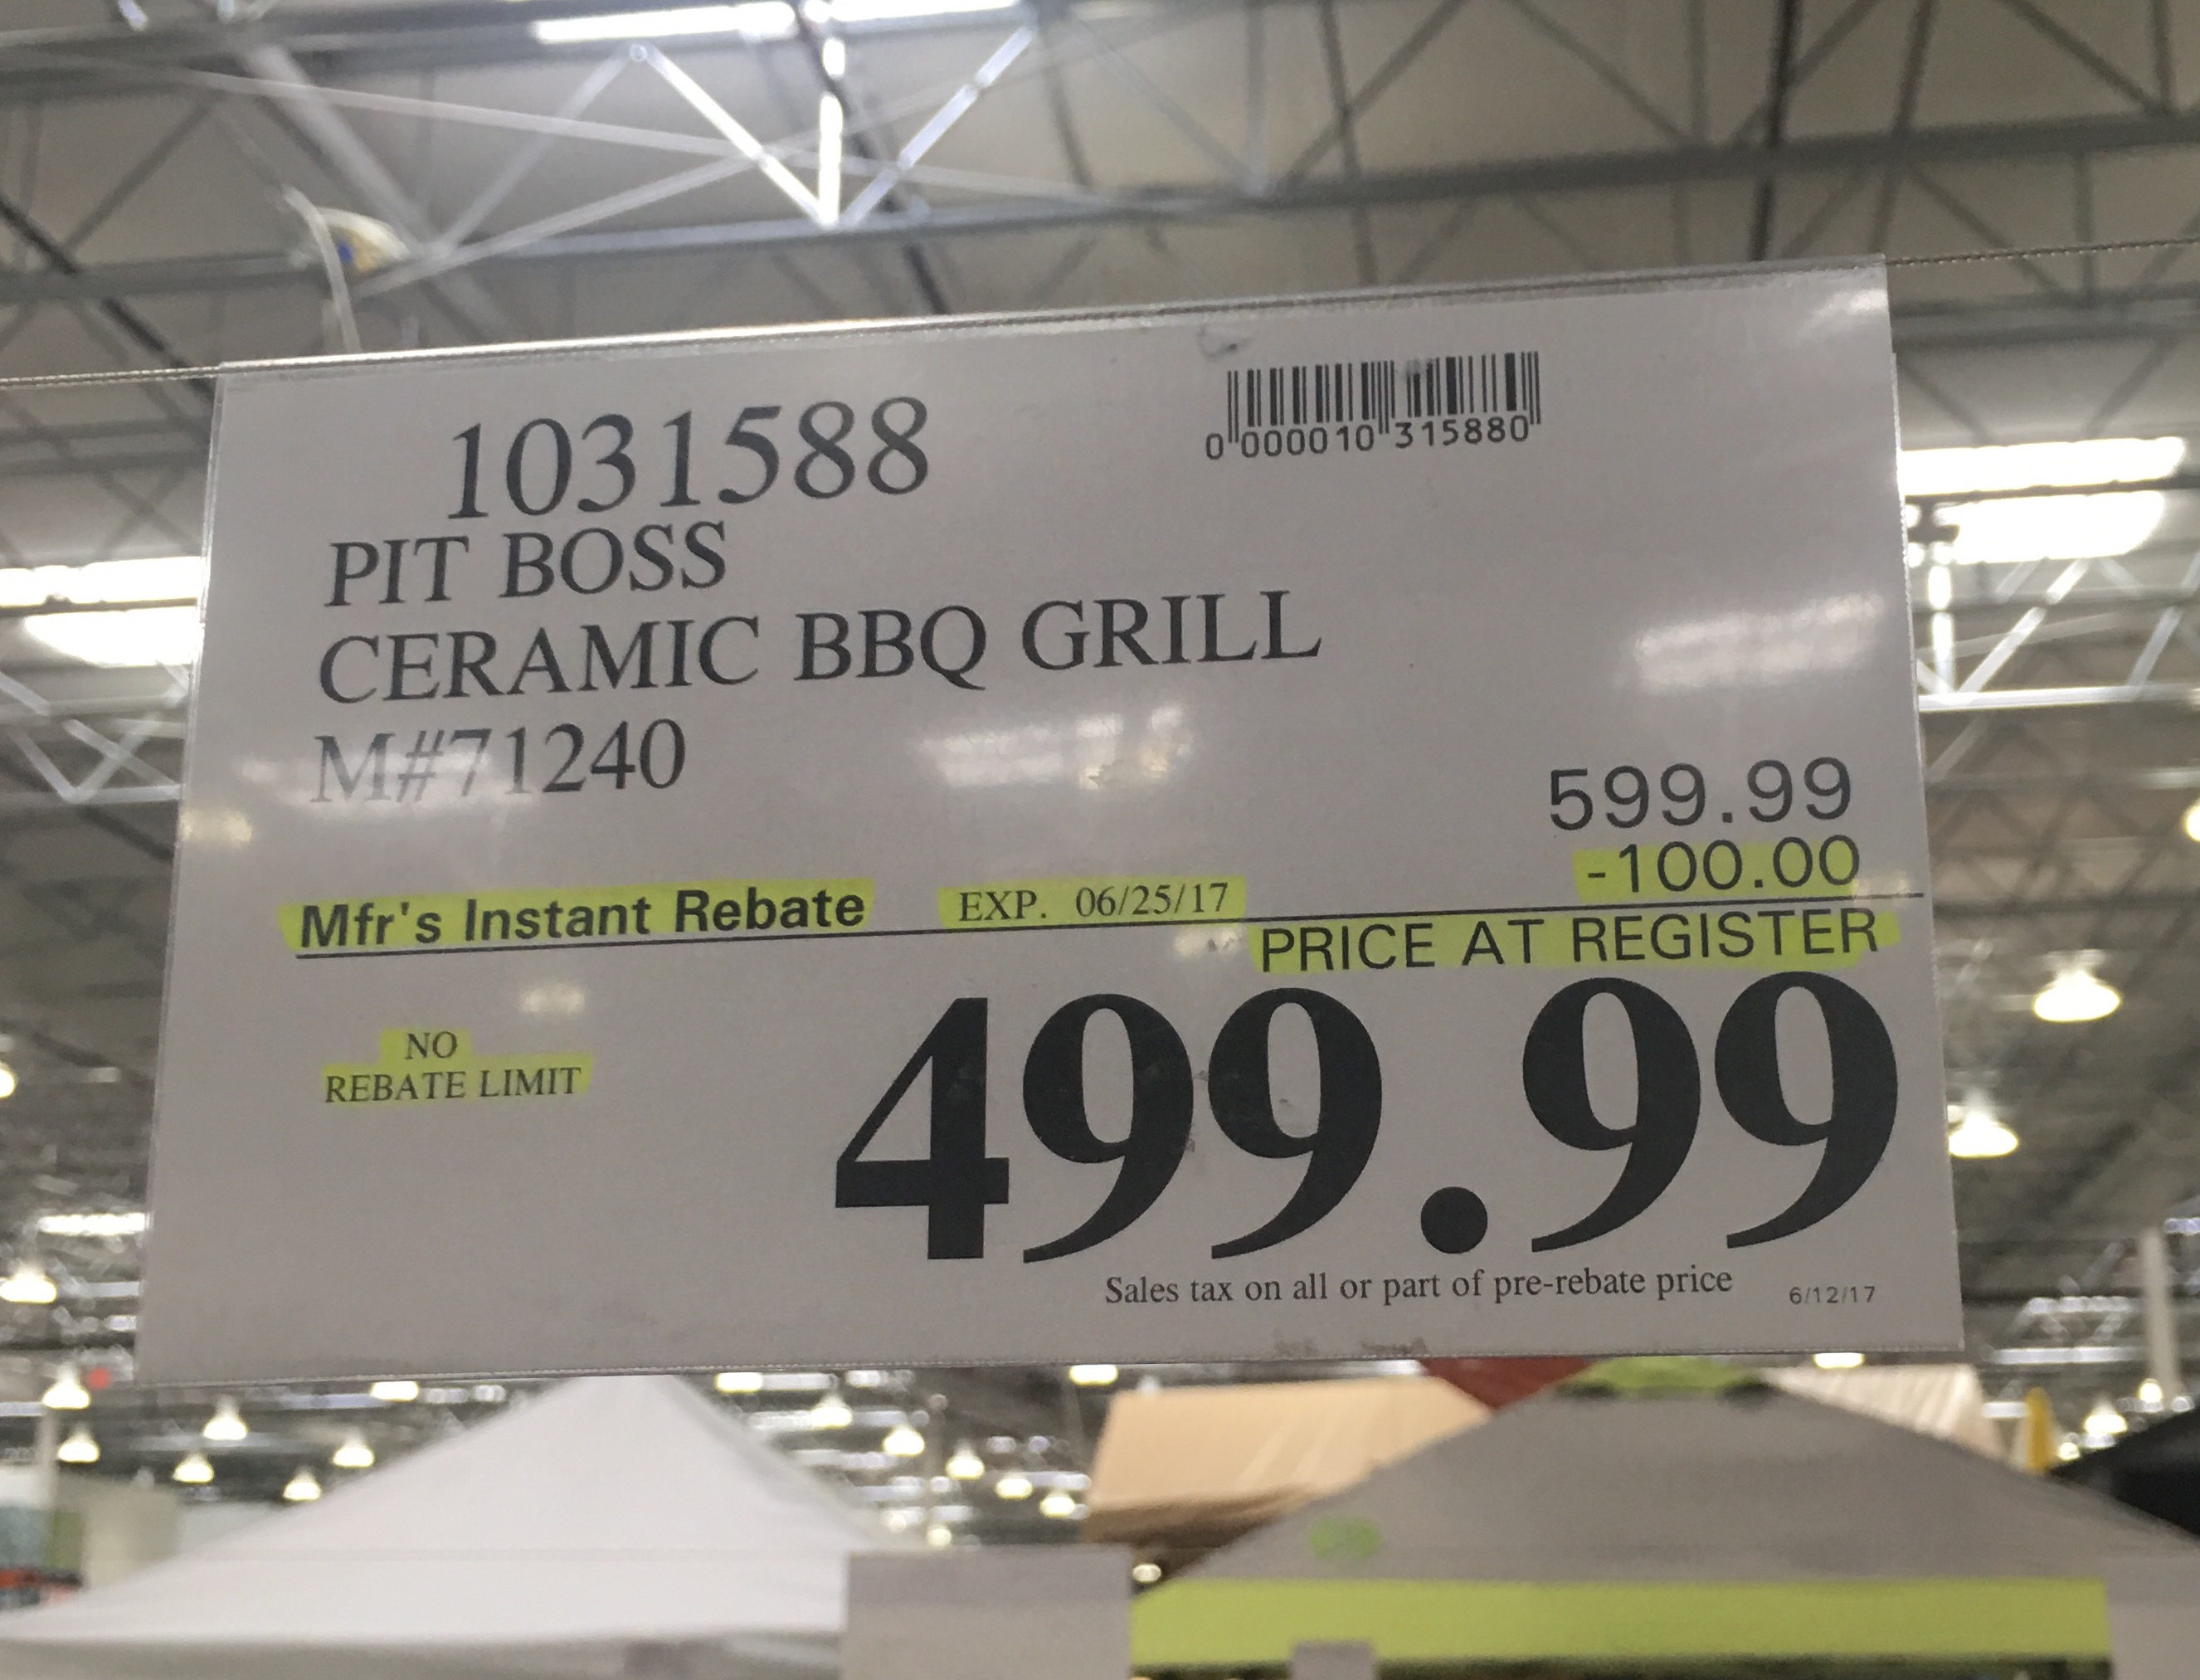 Pit Boss K24 Kamado Grill on sale at Costco Slickdeals